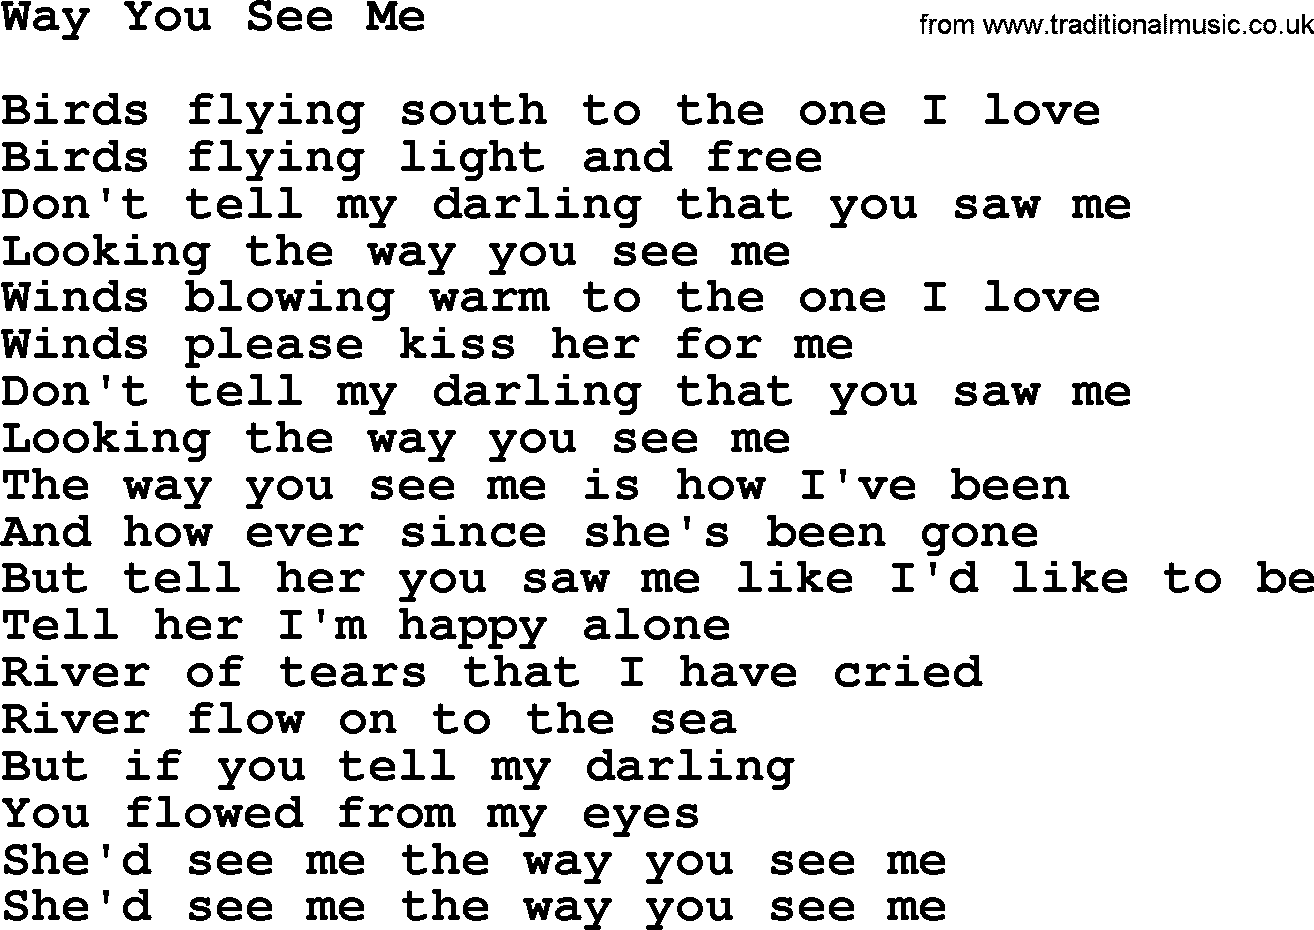 Willie Nelson song: Way You See Me lyrics